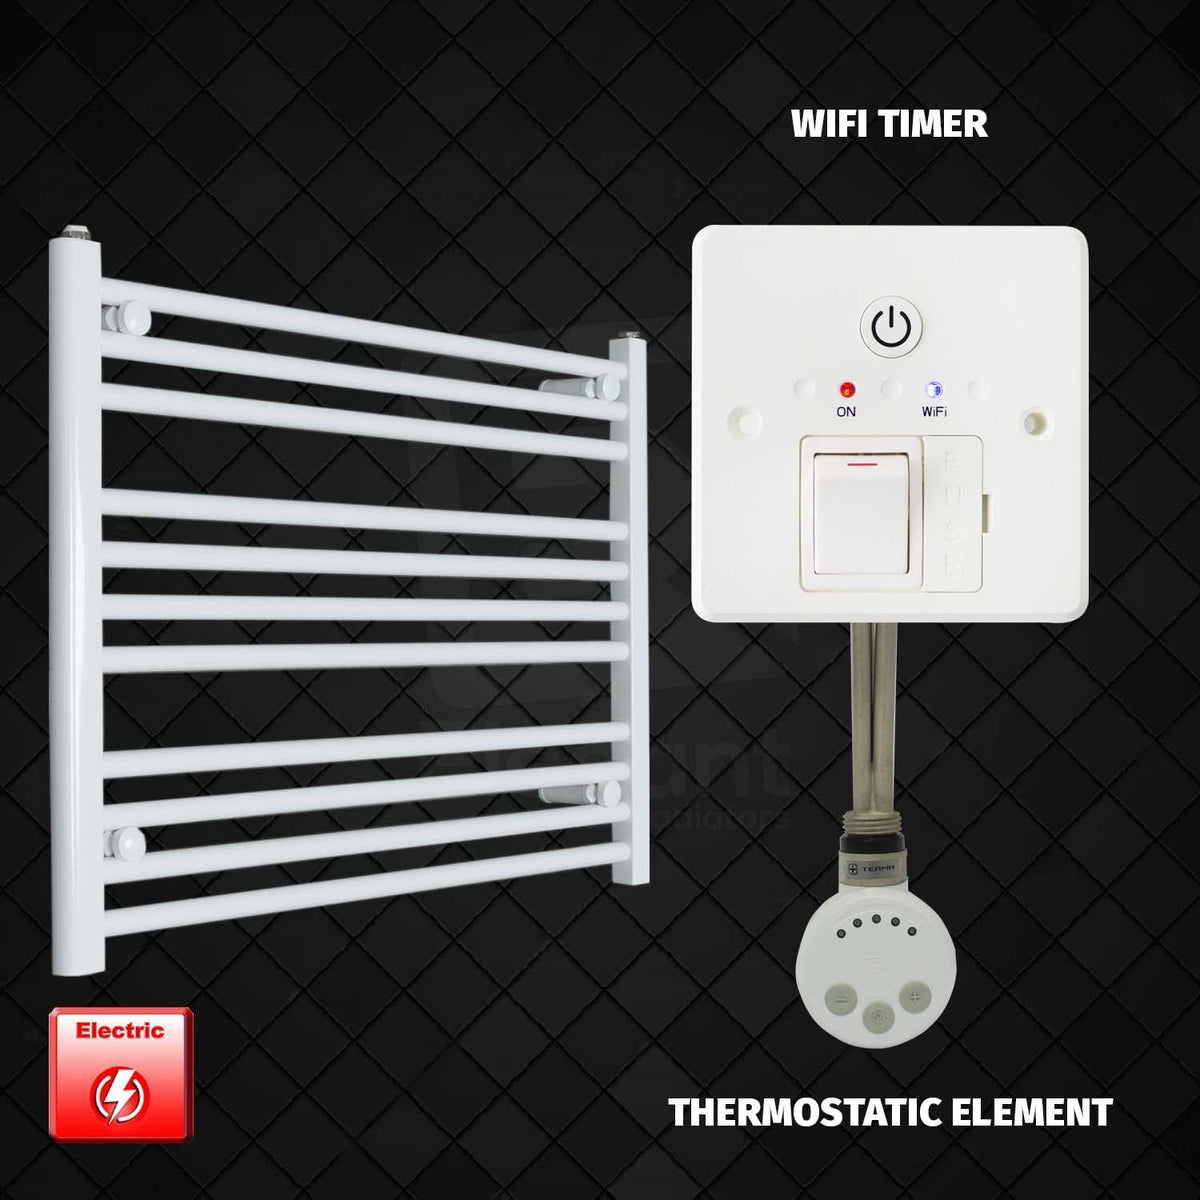 600 mm High 750 mm Wide Pre-Filled Electric Heated Towel Radiator White HTR MOA Thermostatic element Wifi timer